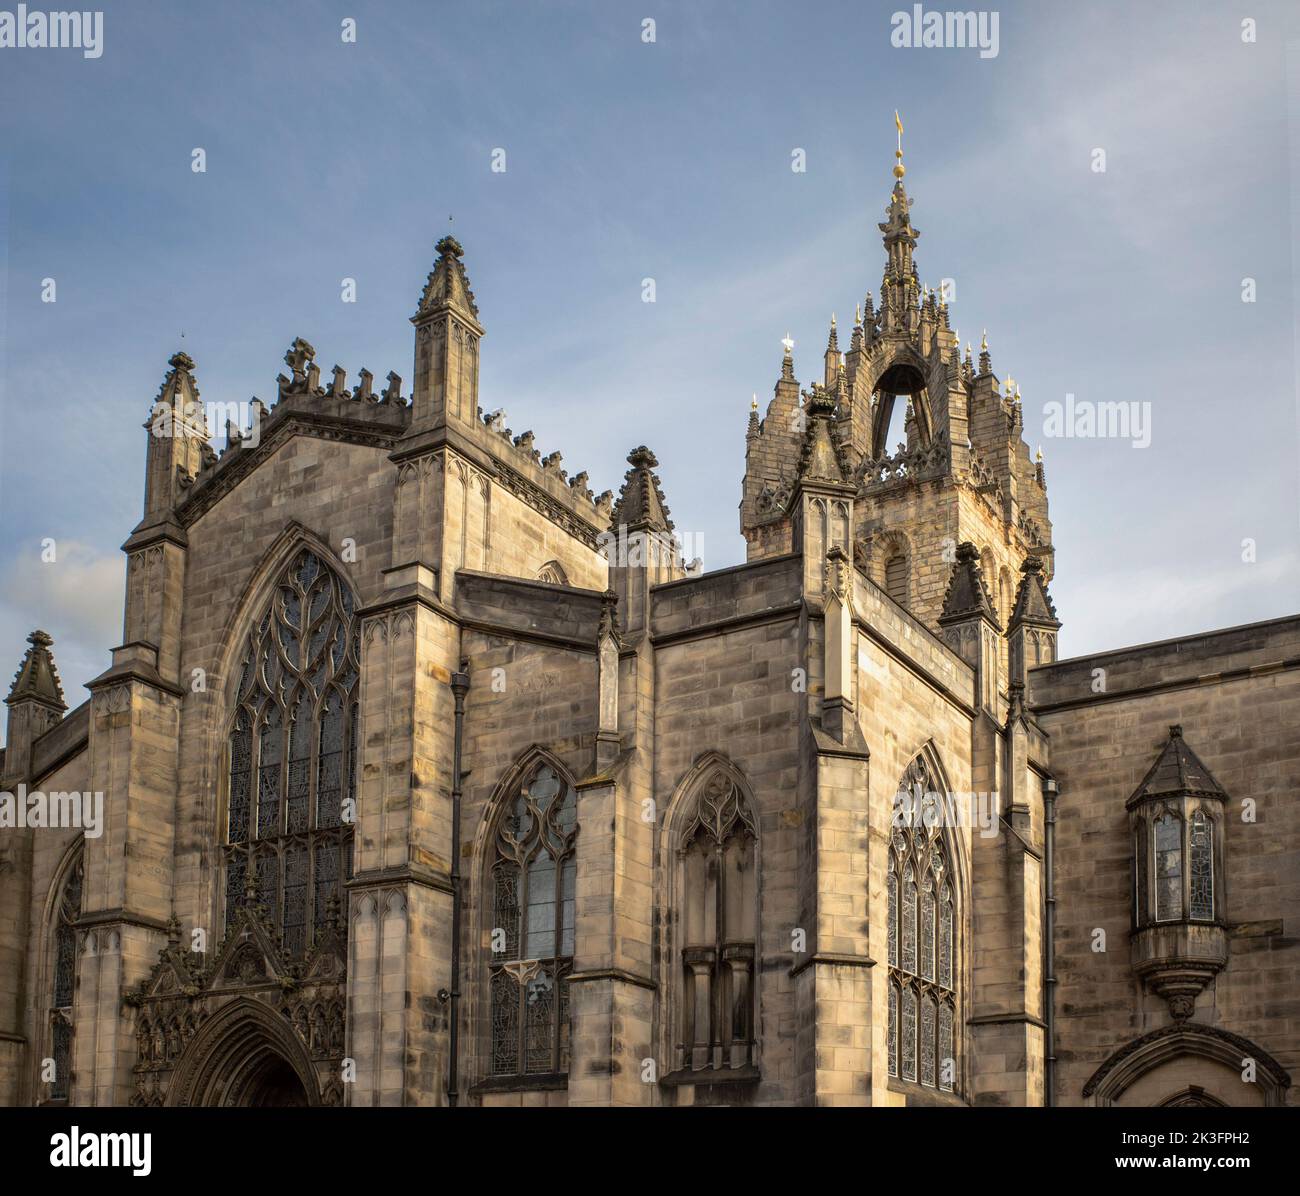 St Giles' Cathedral, or the High Kirk of Edinburgh, is a parish church of the Church of Scotland in the Royal Mile. Stock Photo